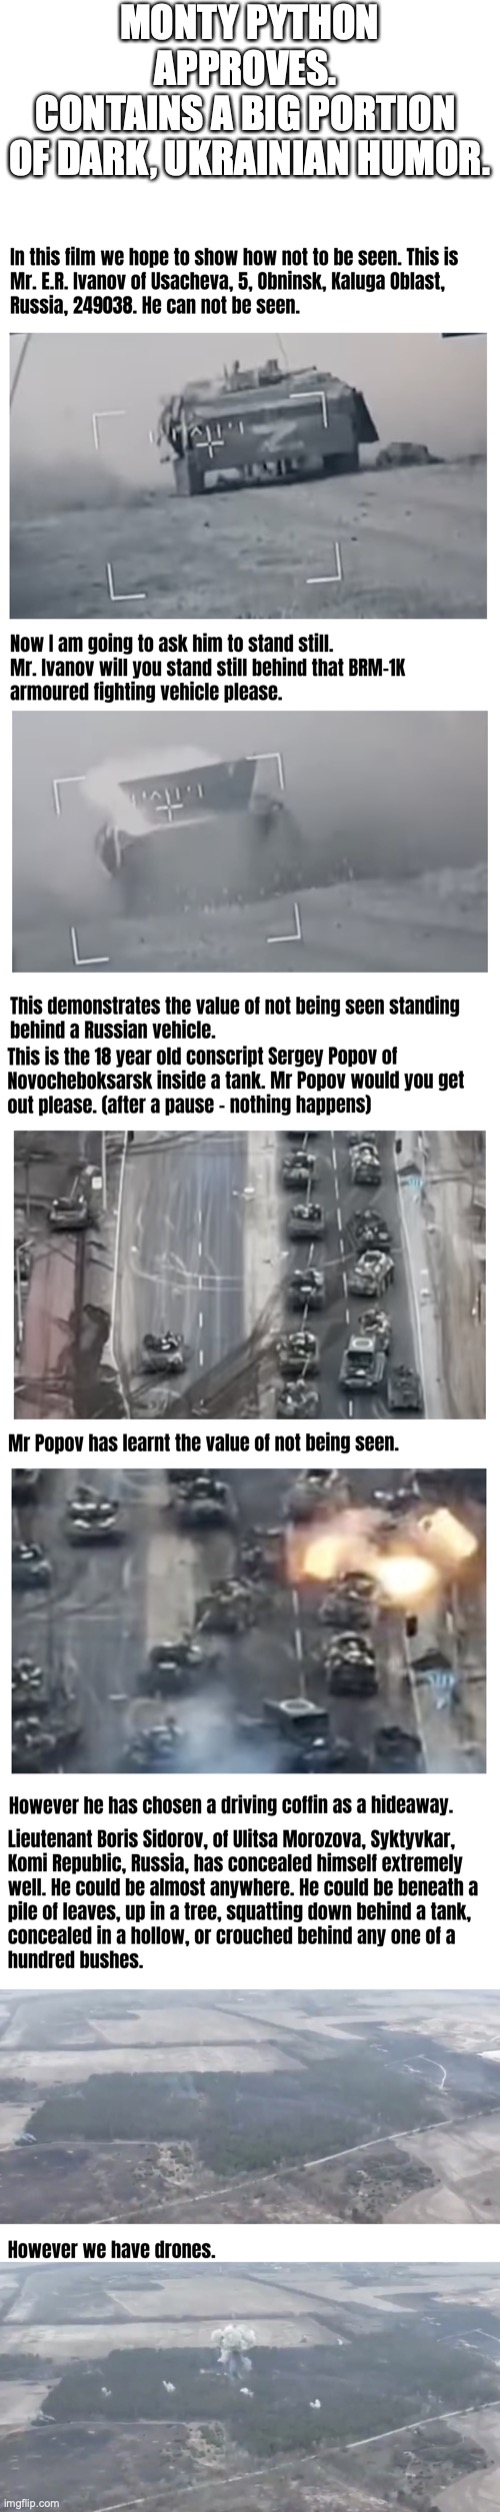 How not to be seen | MONTY PYTHON APPROVES. 
CONTAINS A BIG PORTION 
OF DARK, UKRAINIAN HUMOR. | image tagged in monty python,ukraine,dark humor | made w/ Imgflip meme maker